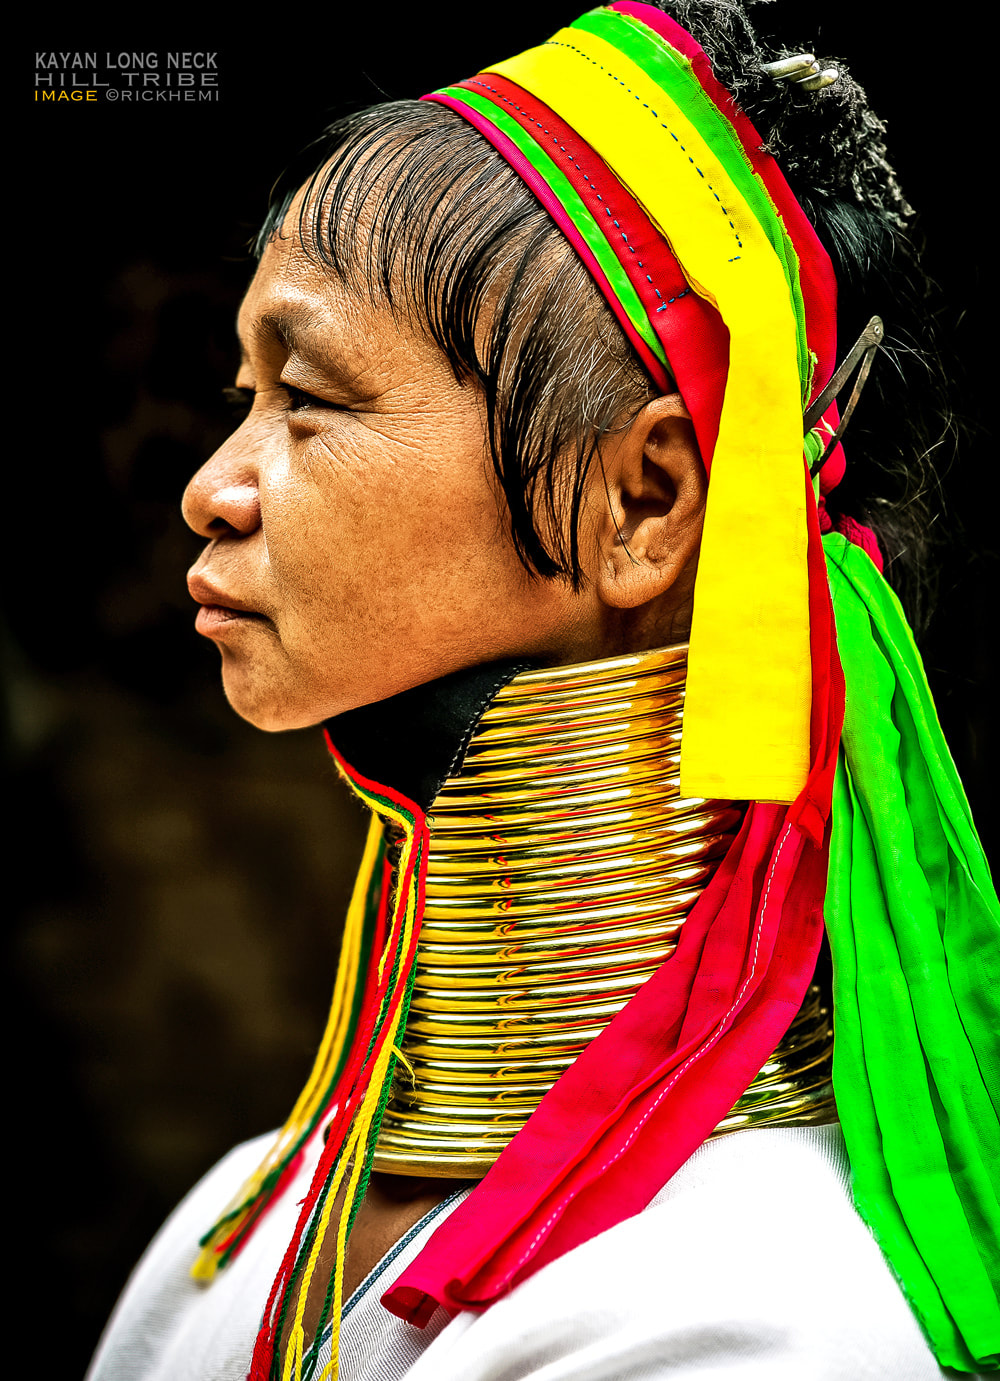 solo overland travel Asia, kayan hill tribe longneck, image by Rick Hemi